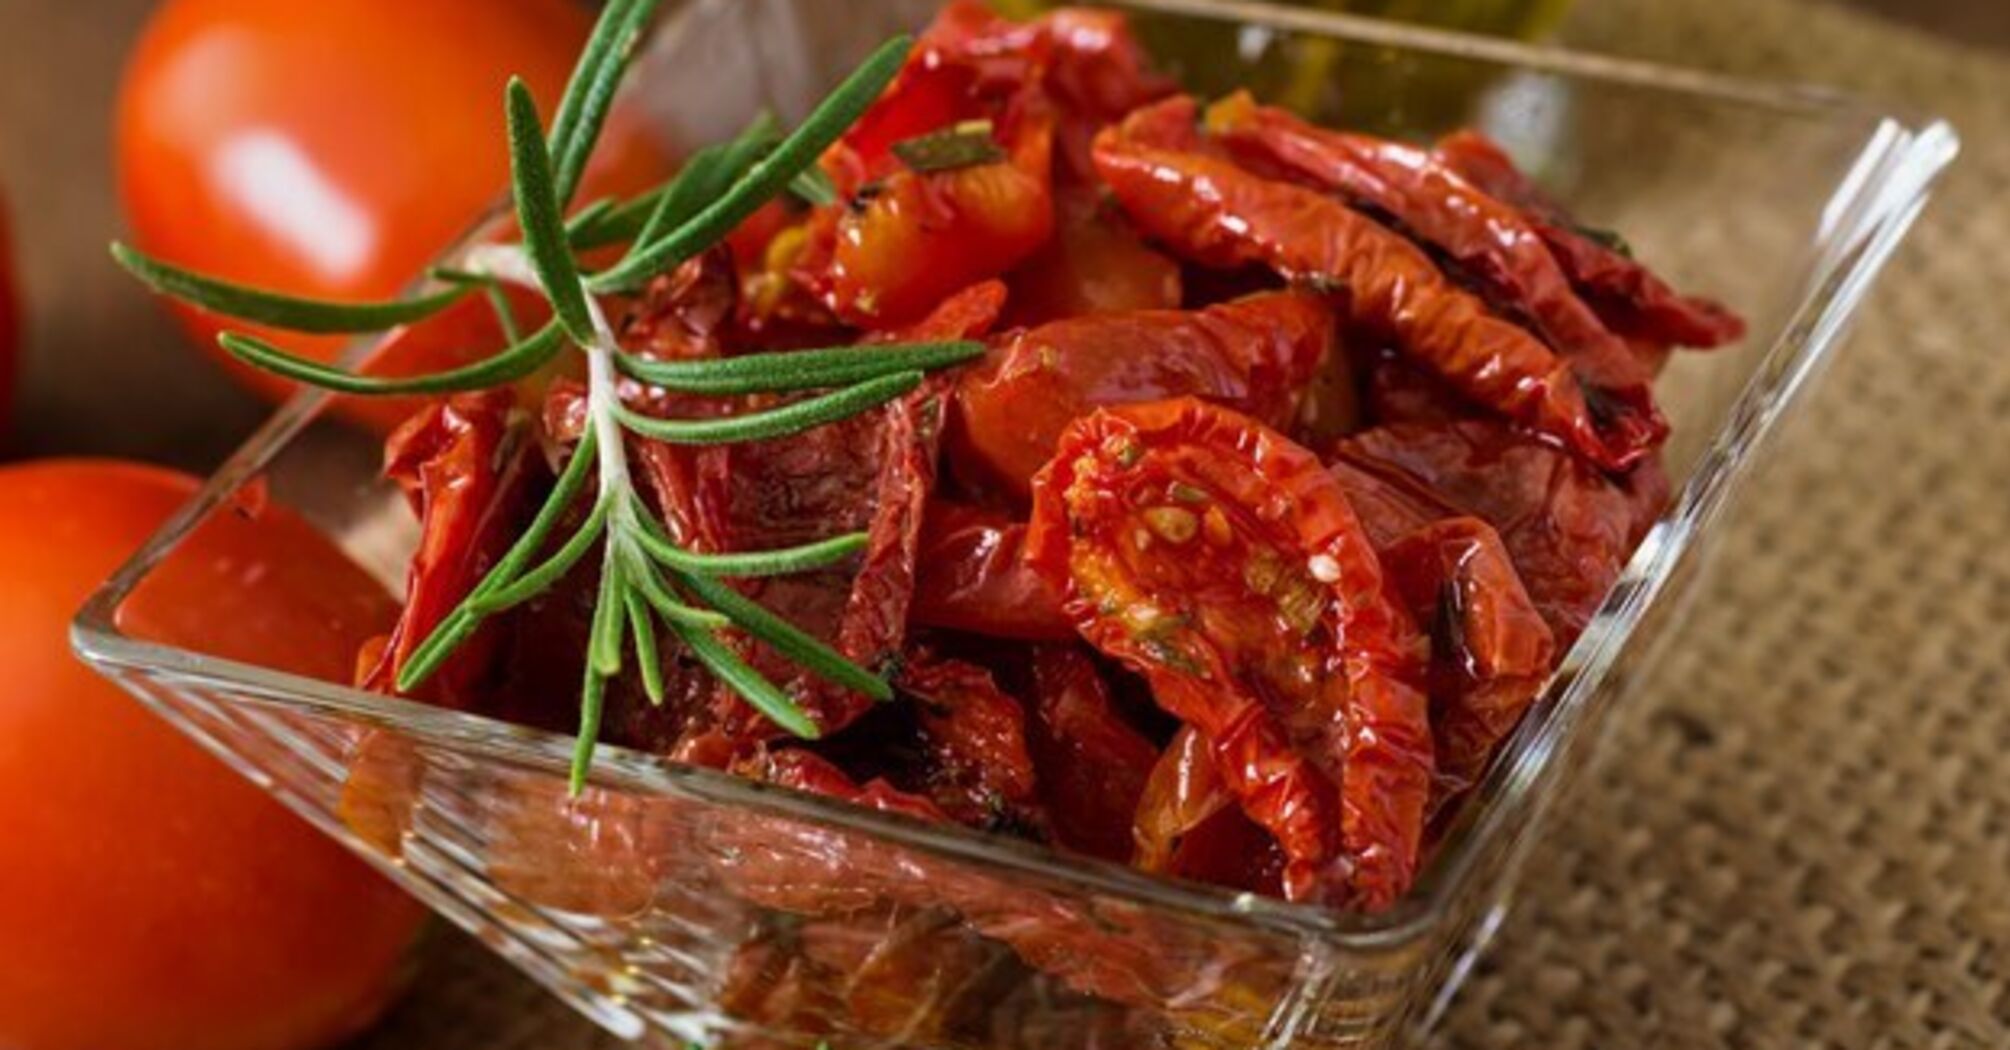 Dried tomatoes: how to prepare them properly according to Hector Jimenez-Bravo 